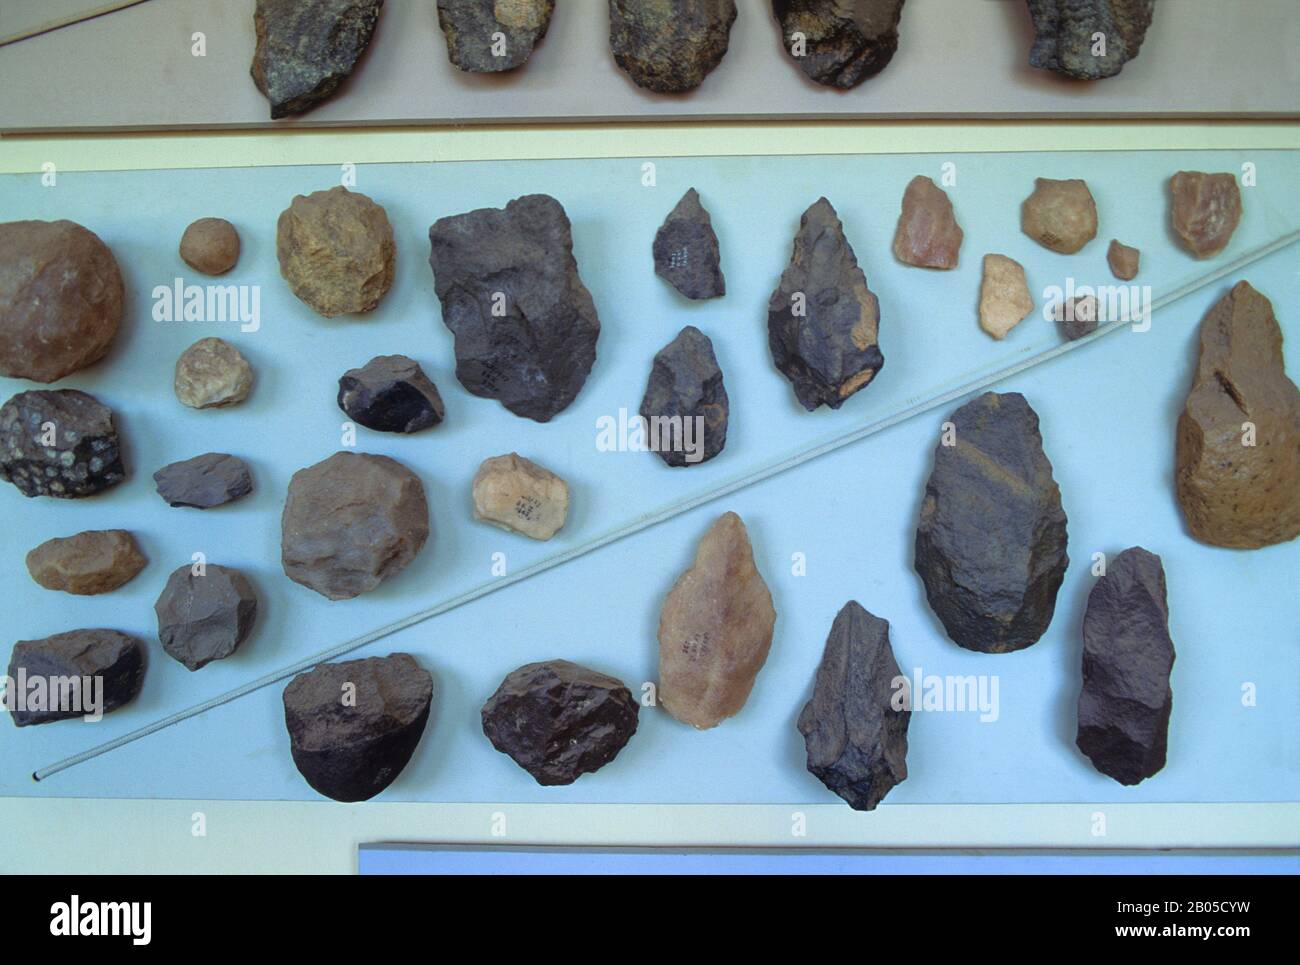 https://c8.alamy.com/comp/2B05CYW/these-olduvai-stone-chopping-tools-on-display-in-the-olduvai-gorge-museum-are-one-of-the-oldest-humanly-made-objects-the-olduvai-gorge-is-one-of-the-2B05CYW.jpg